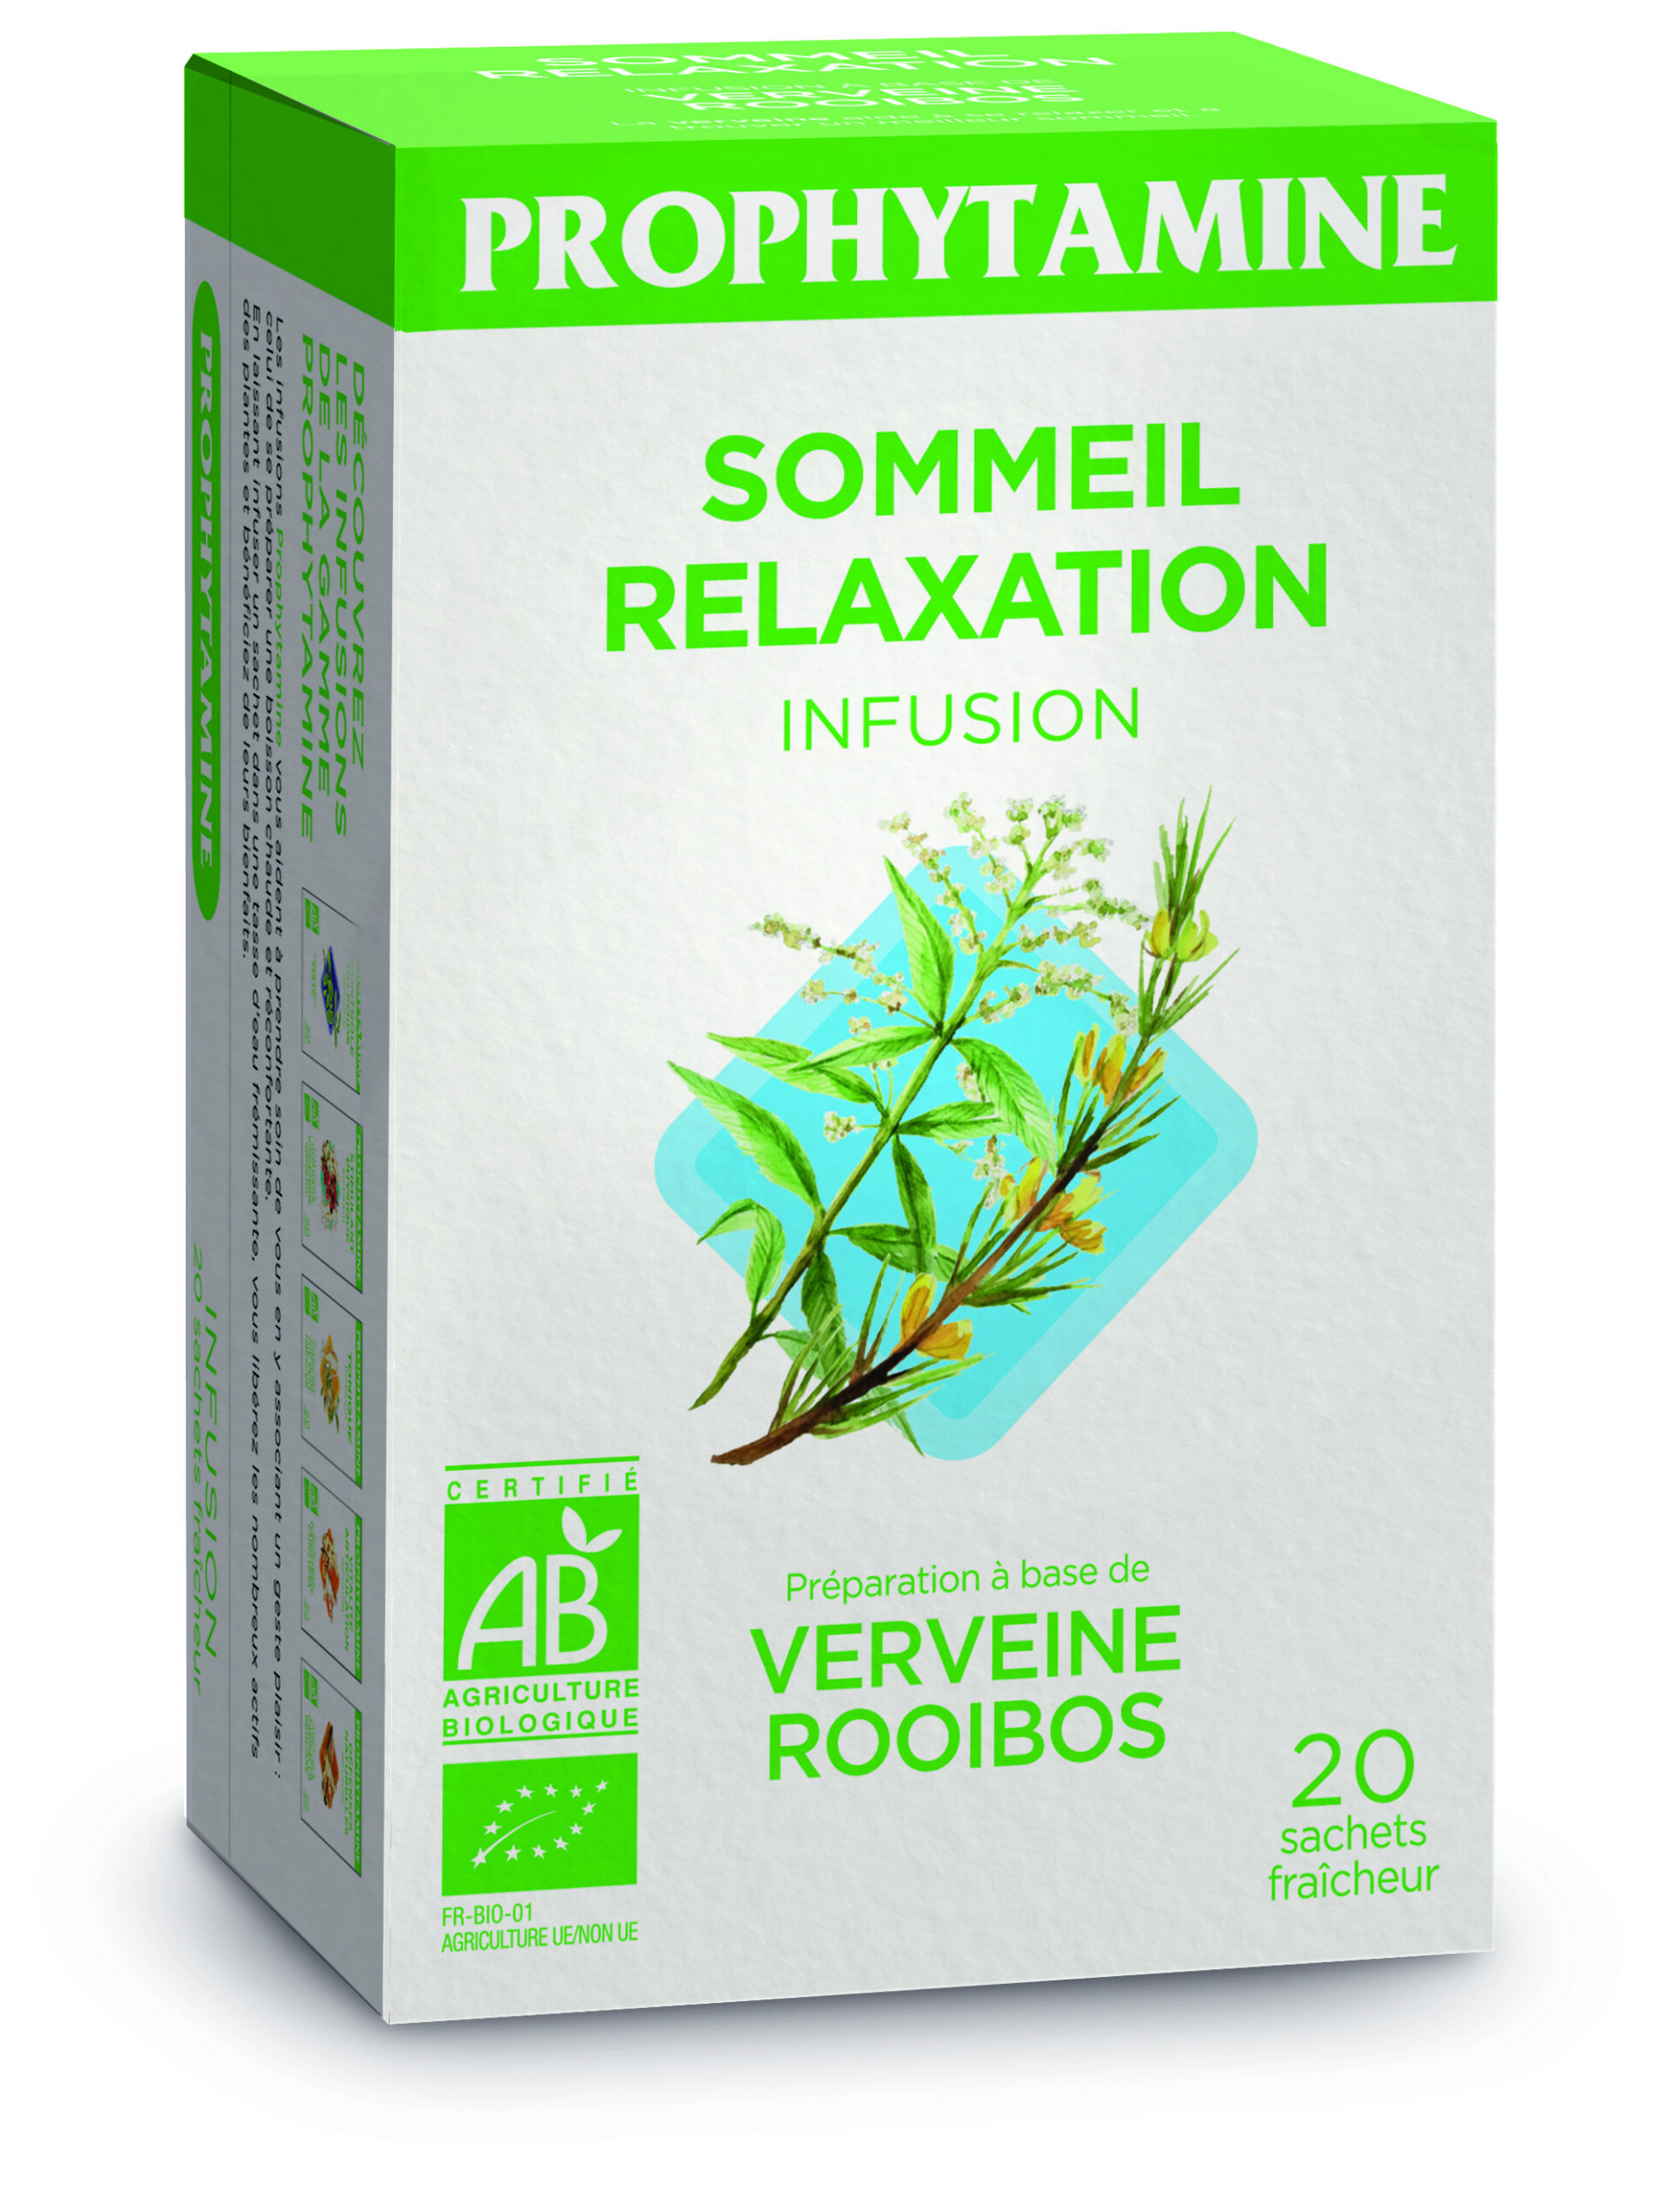 https://paradisexotique.com/wp-content/uploads/2022/12/PROINFSRBIO-Infusion-Sommeil-Relaxation-PROPHYTAMINE-scaled.jpg